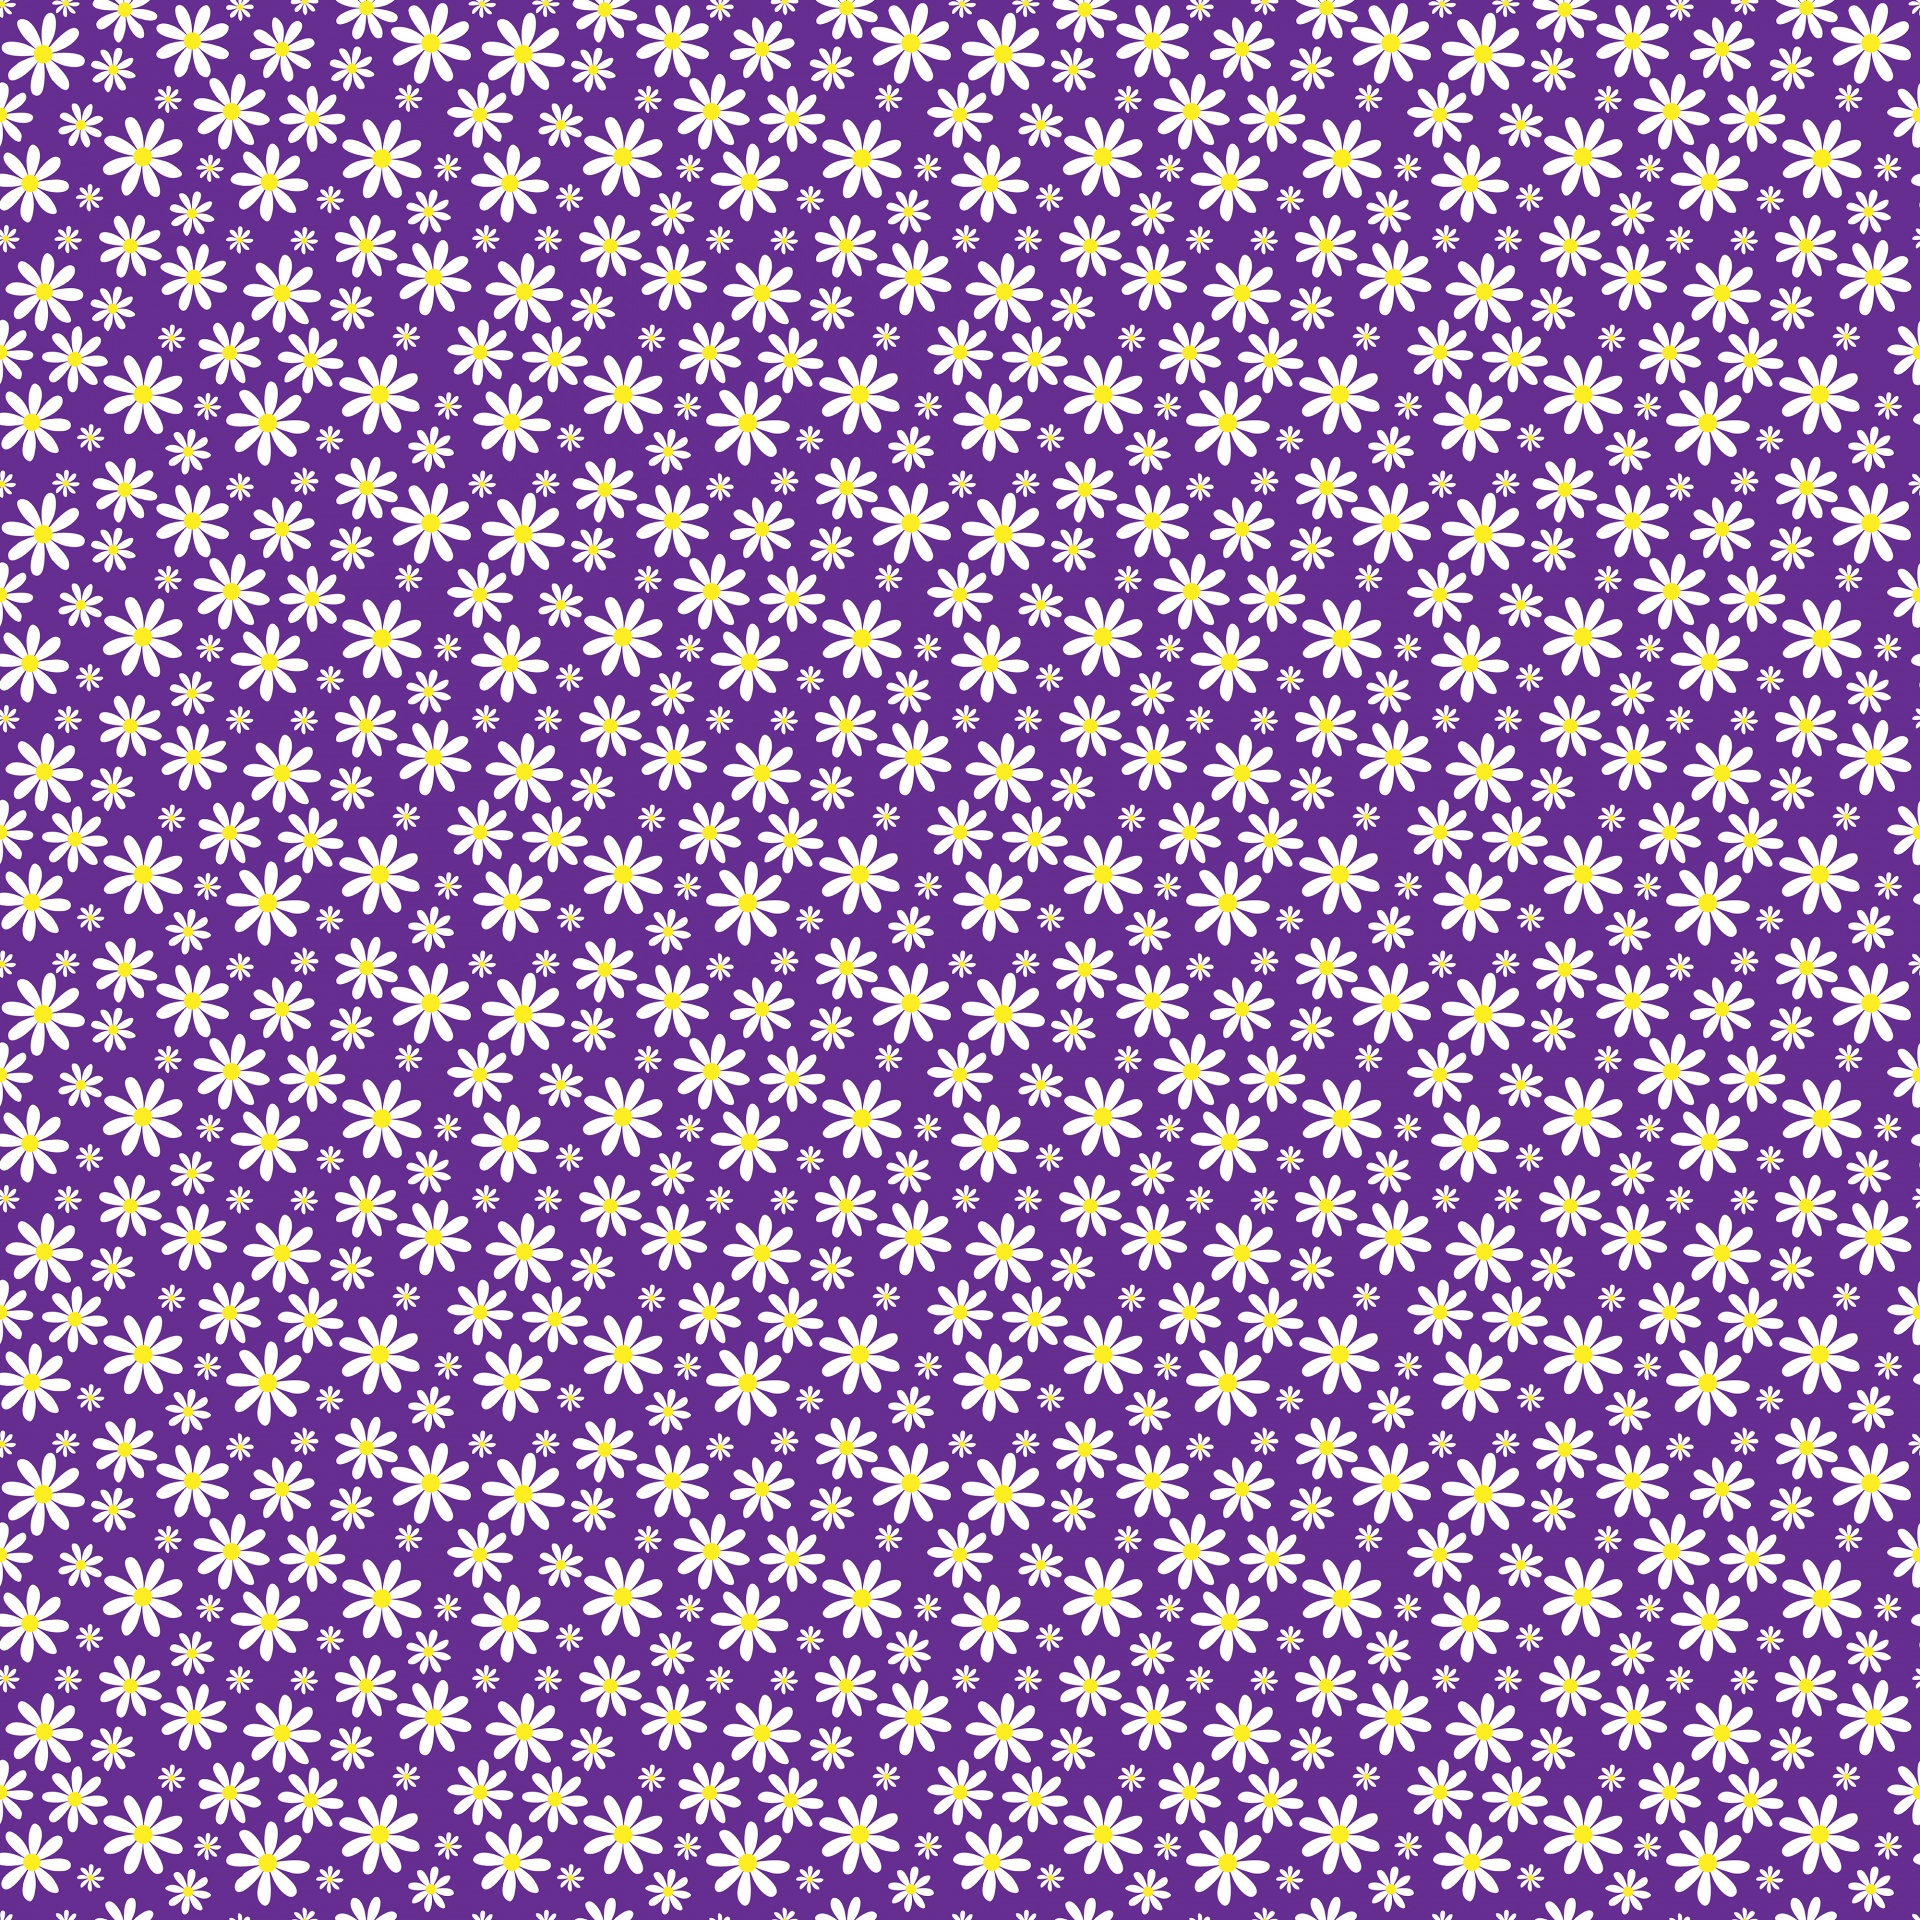 Floral Daisy Flowers Wallpaper